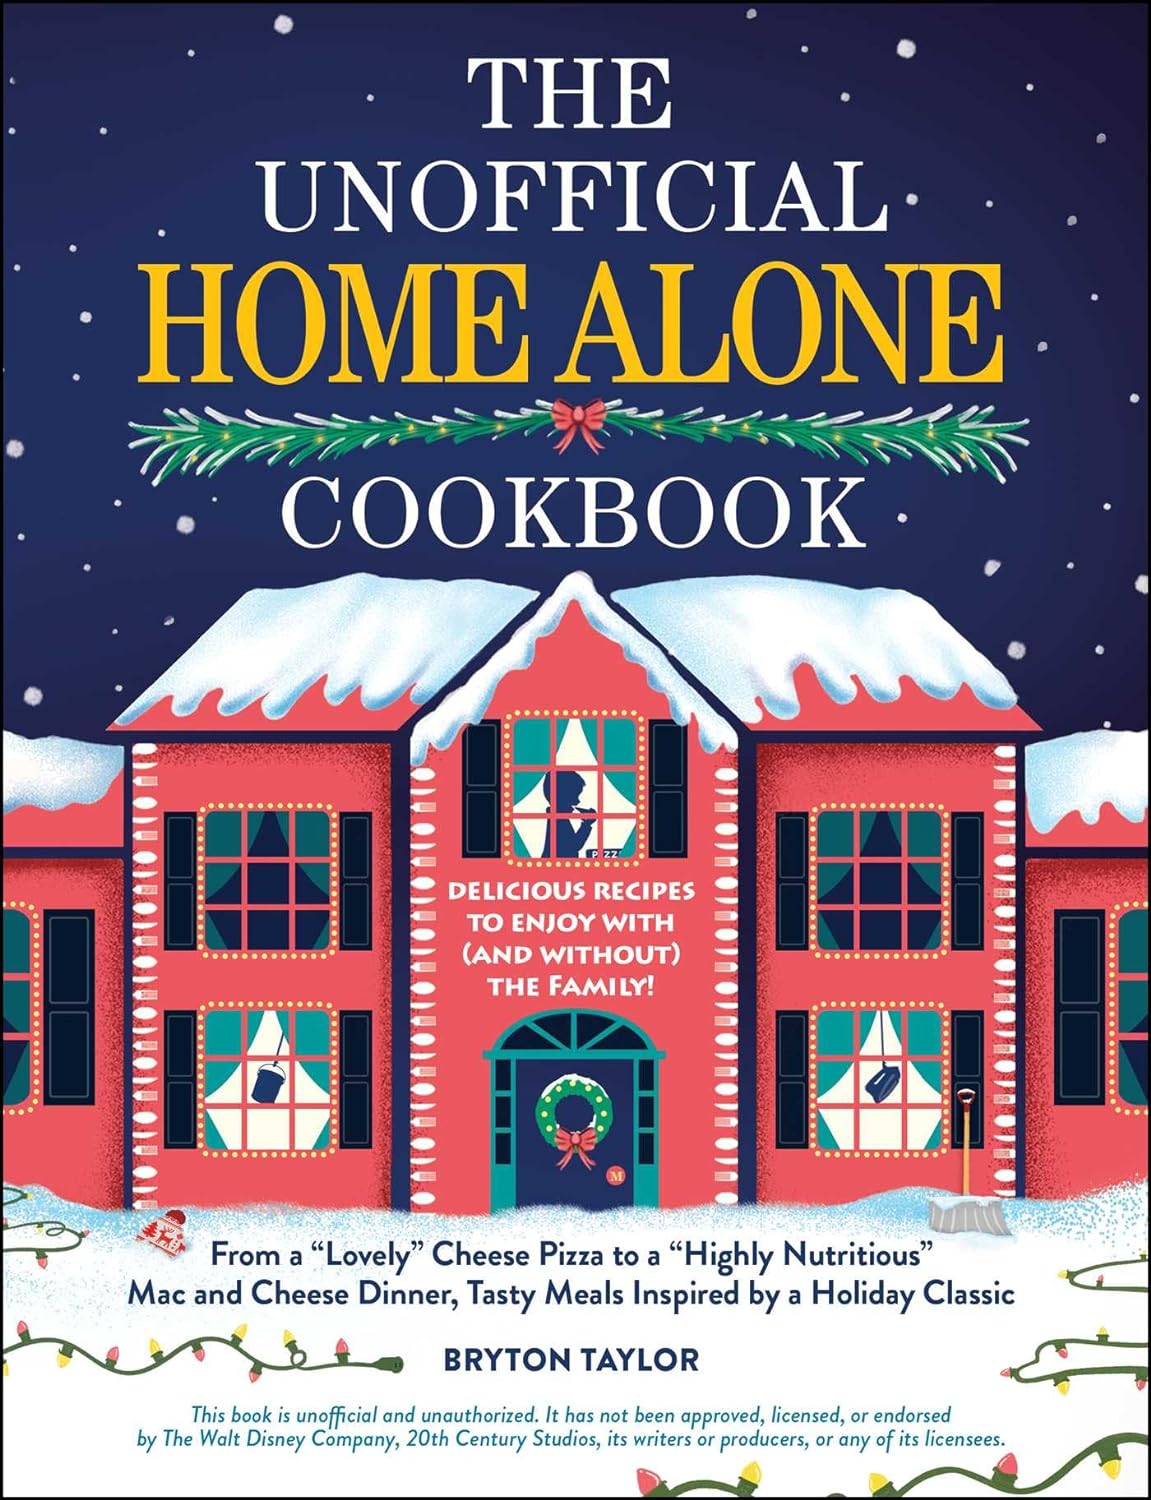 The Unofficial Home Alone Cookbook Review